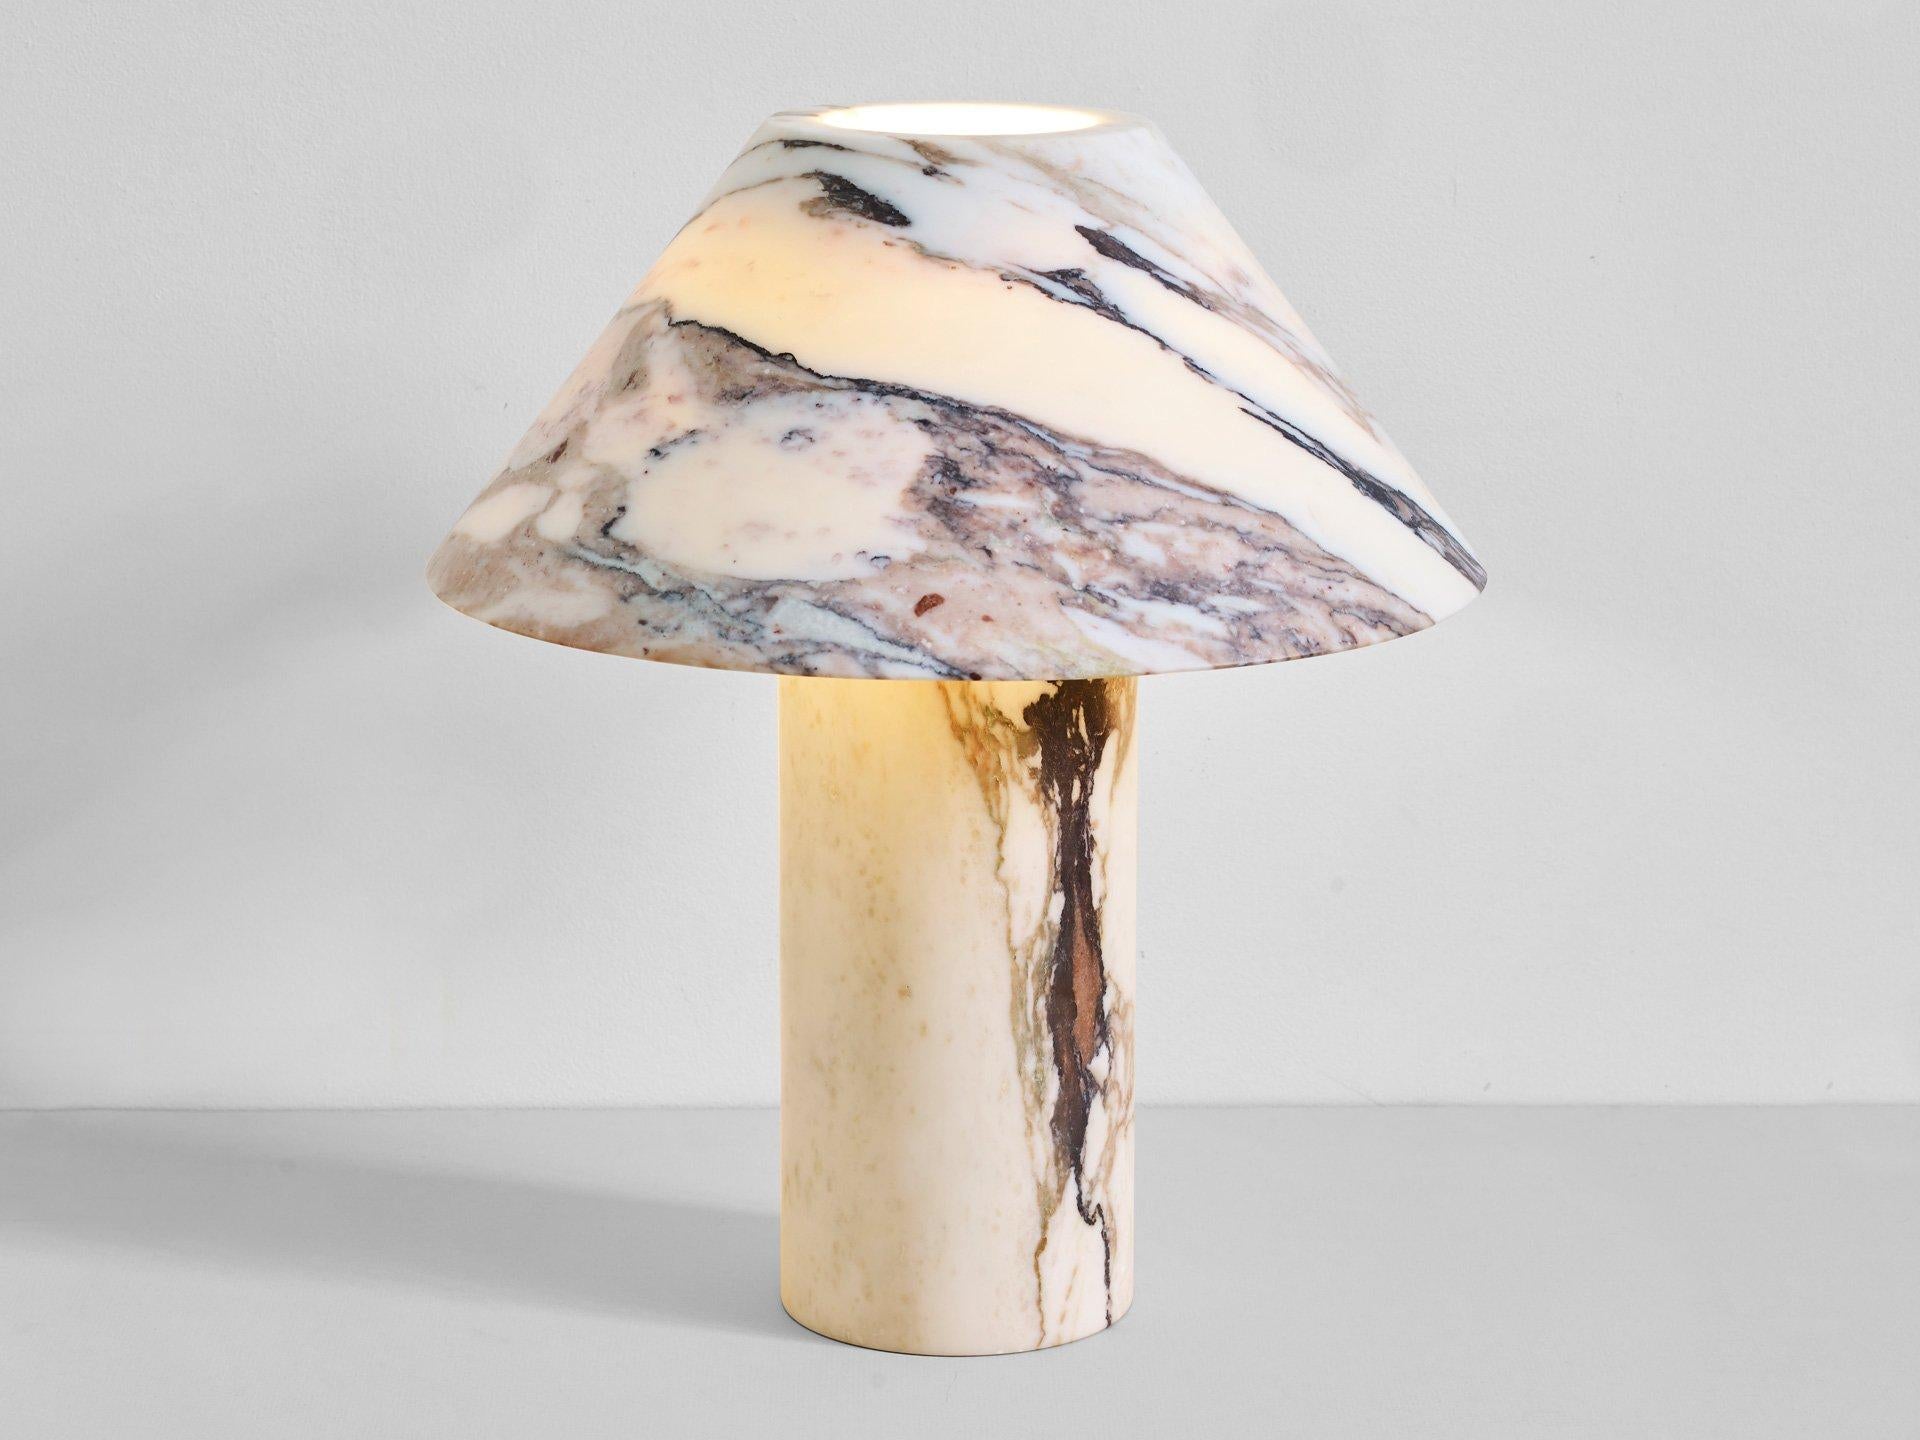 Large Calacatta Viola Pillar Lamp by Henry Wilson
Dimensions: D 35 x H 40 cm
Materials: Calacatta Viola Marble

This sculptural item is handmade in Sydney Australia.

Pillar lamp is hewn from two pieces of solid Calacatta viola marble.
Dimensions: